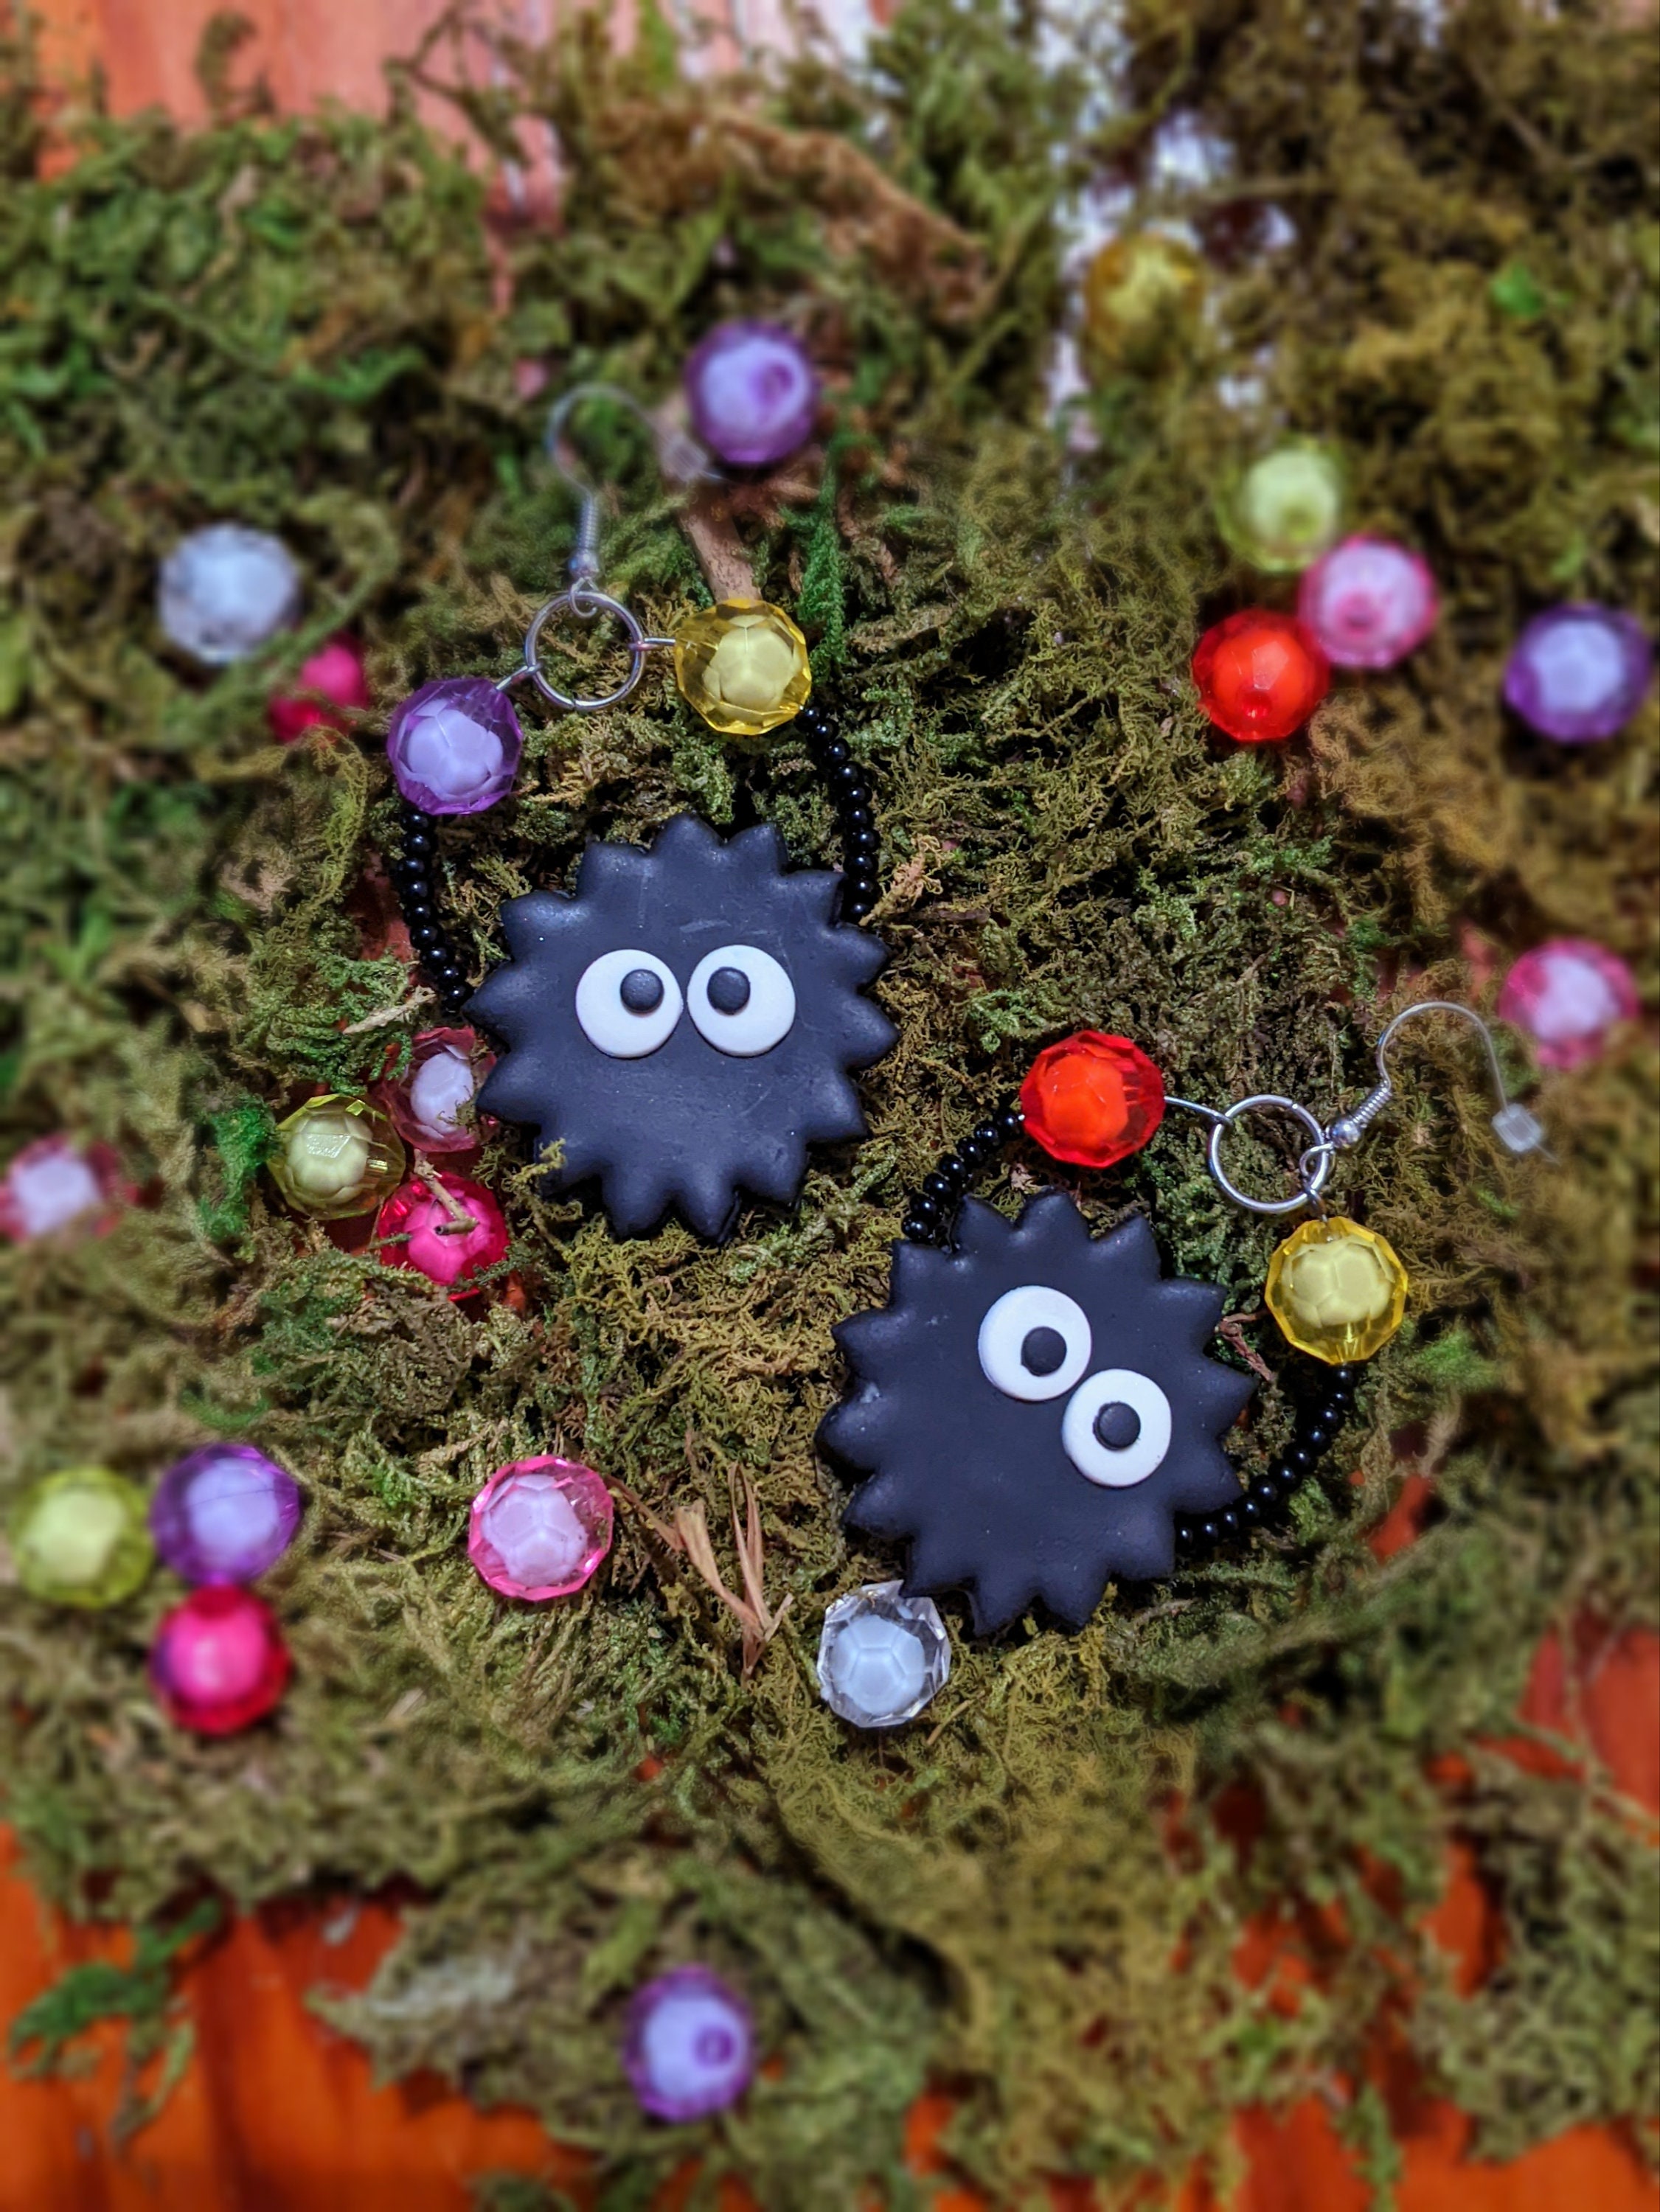 Soot Sprites by Magicallymadeart